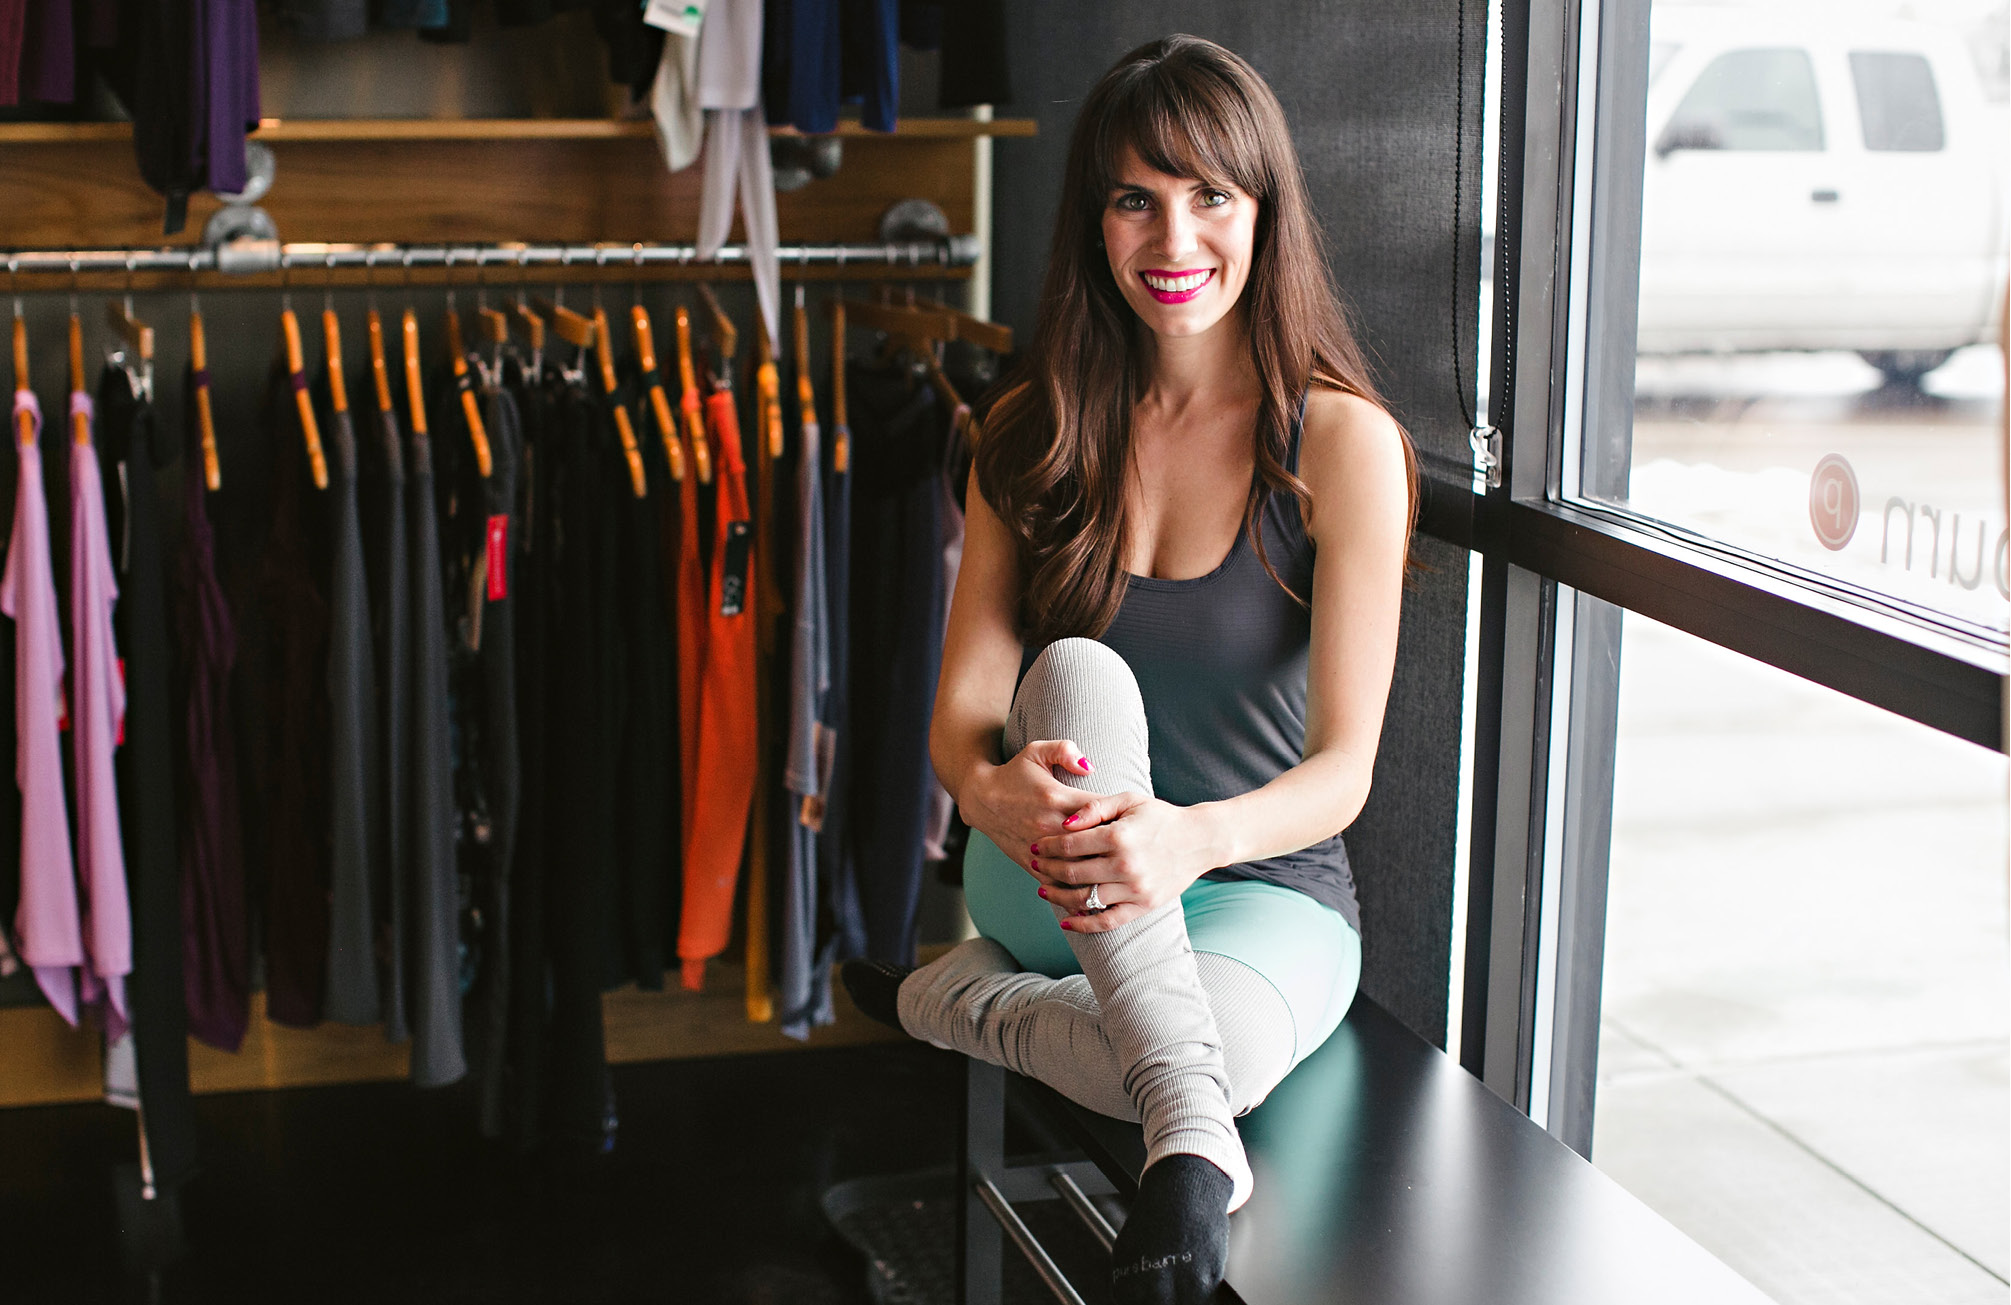 An Interview With Stephanie Spalding of Pure Barre Image